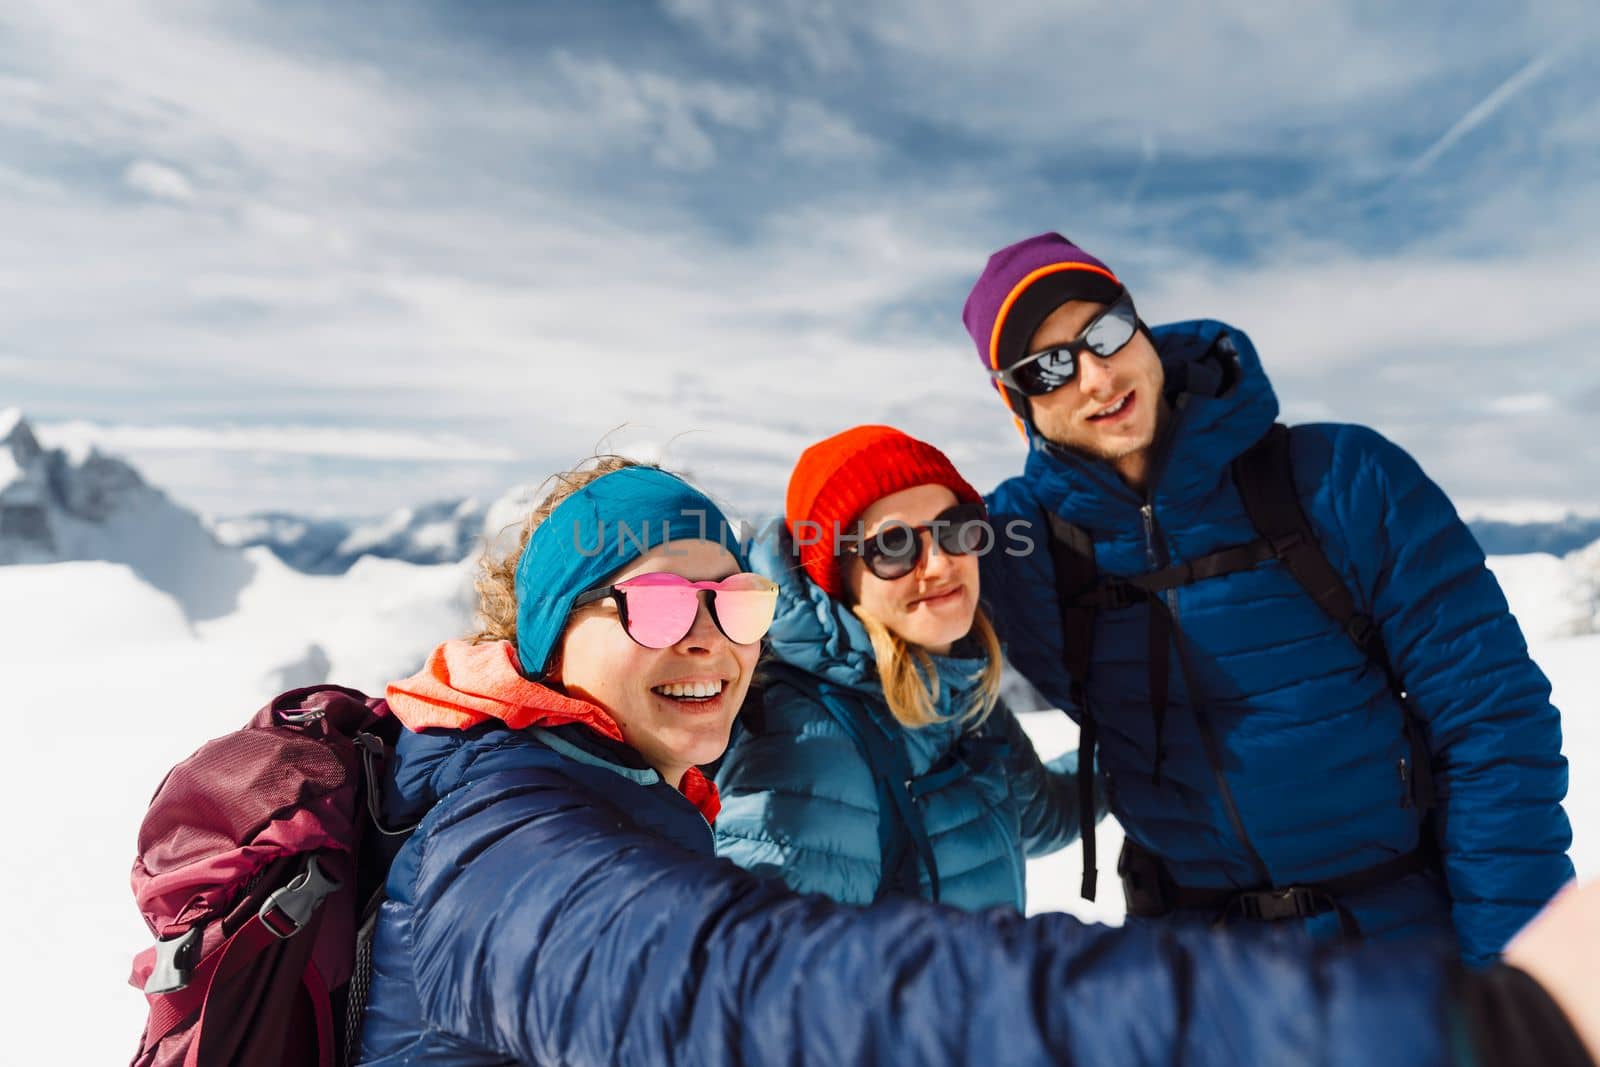 Smiling group of three mountaineers taking a selfie up in the sunny snowy mountains by VisualProductions